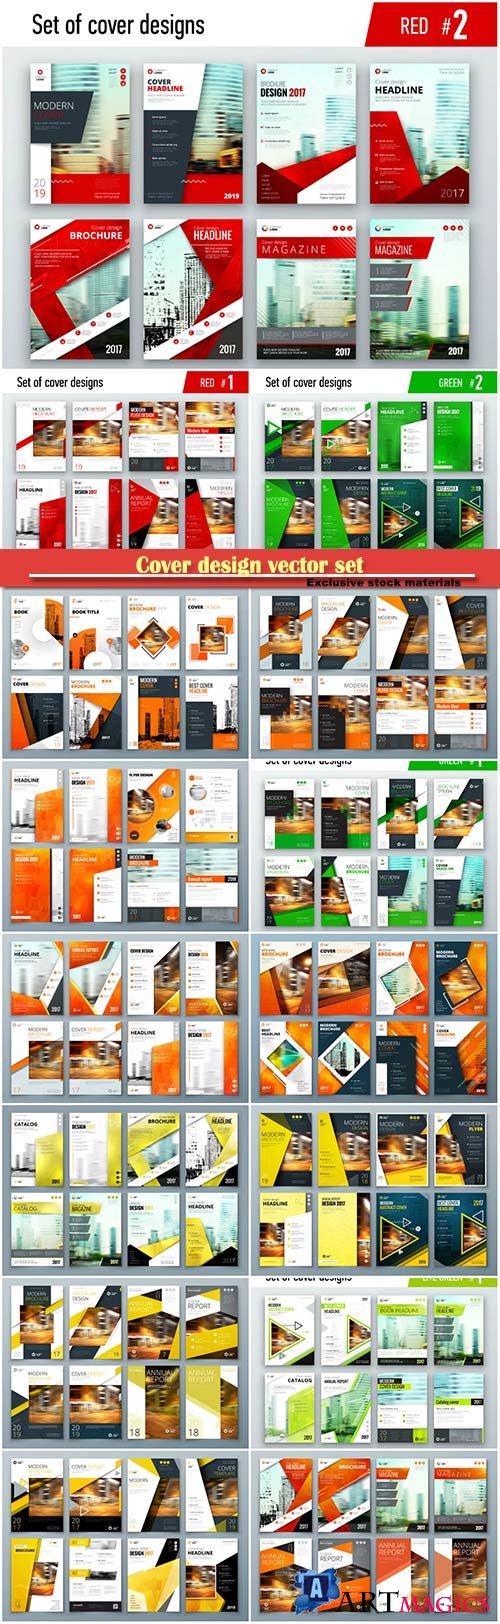 Cover design vector set, corporate business template for brochure, report, catalog, magazine